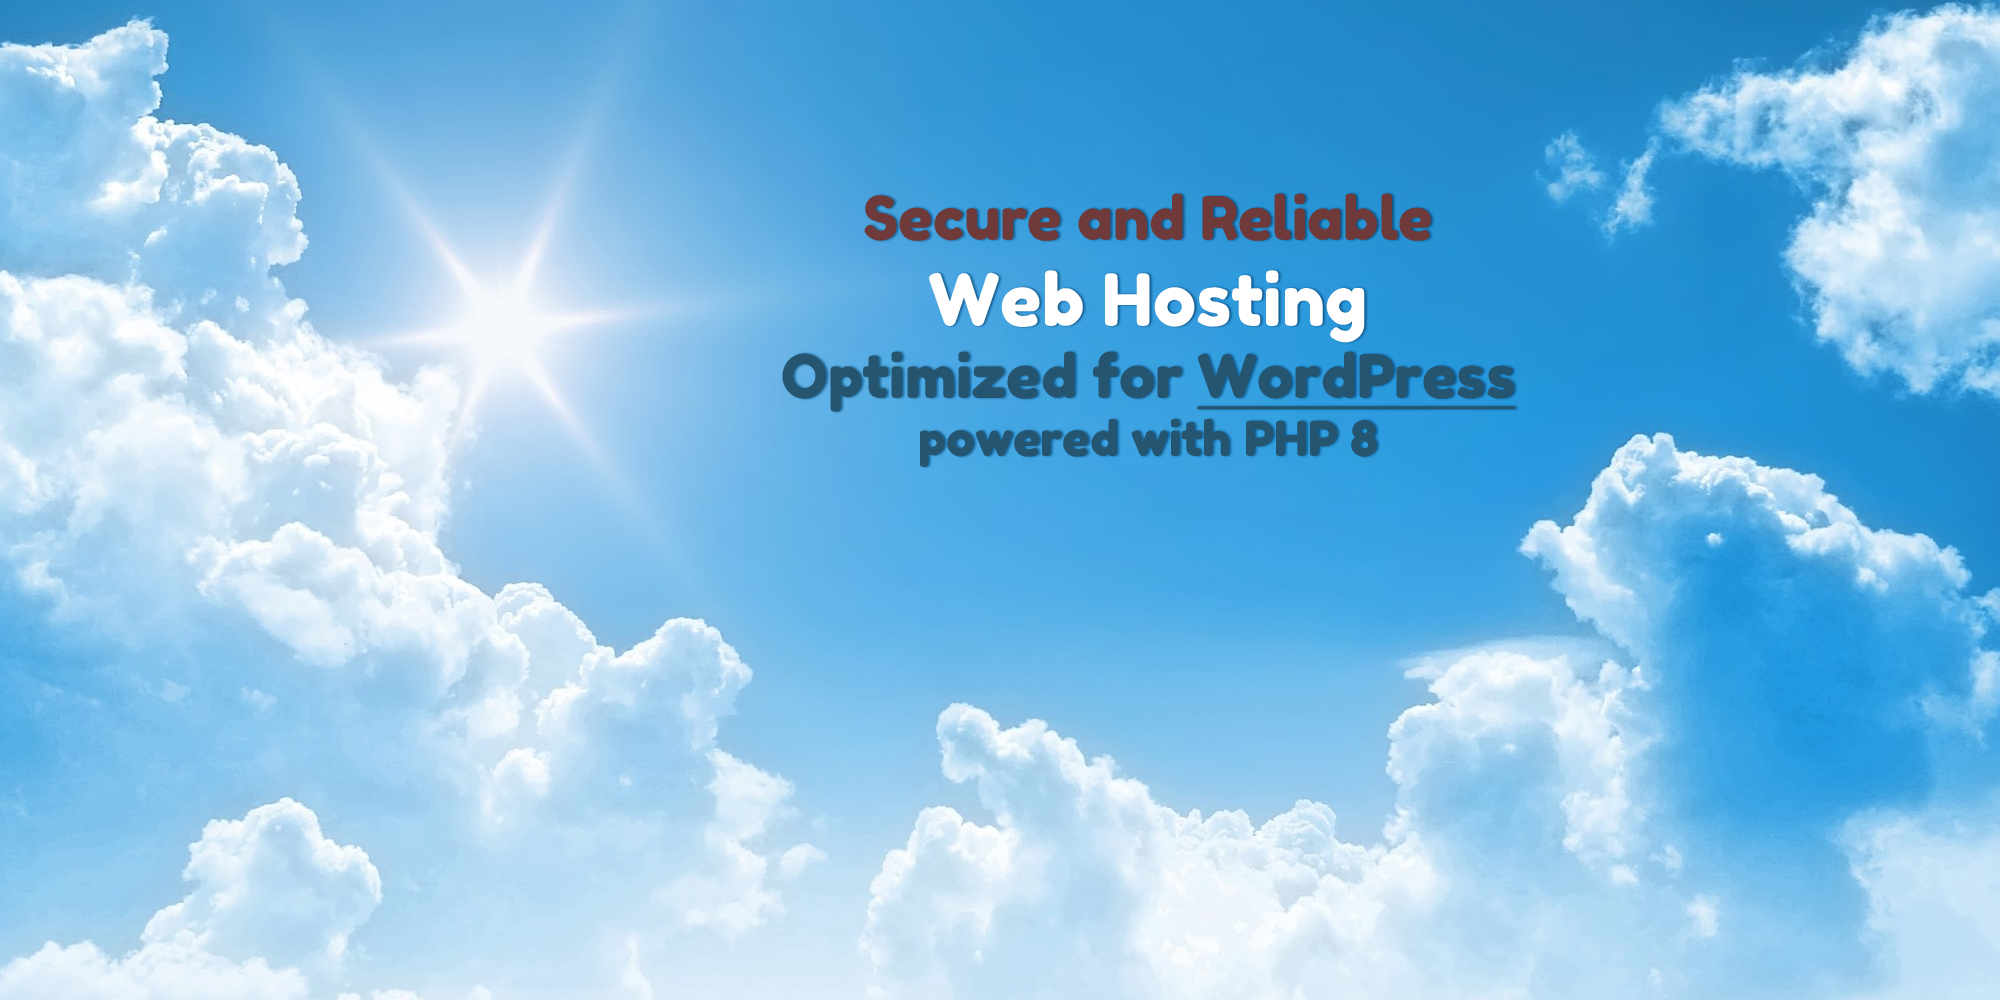 Secure and Reliable Web Hosting Optimized for WordPress powered with PHP 7